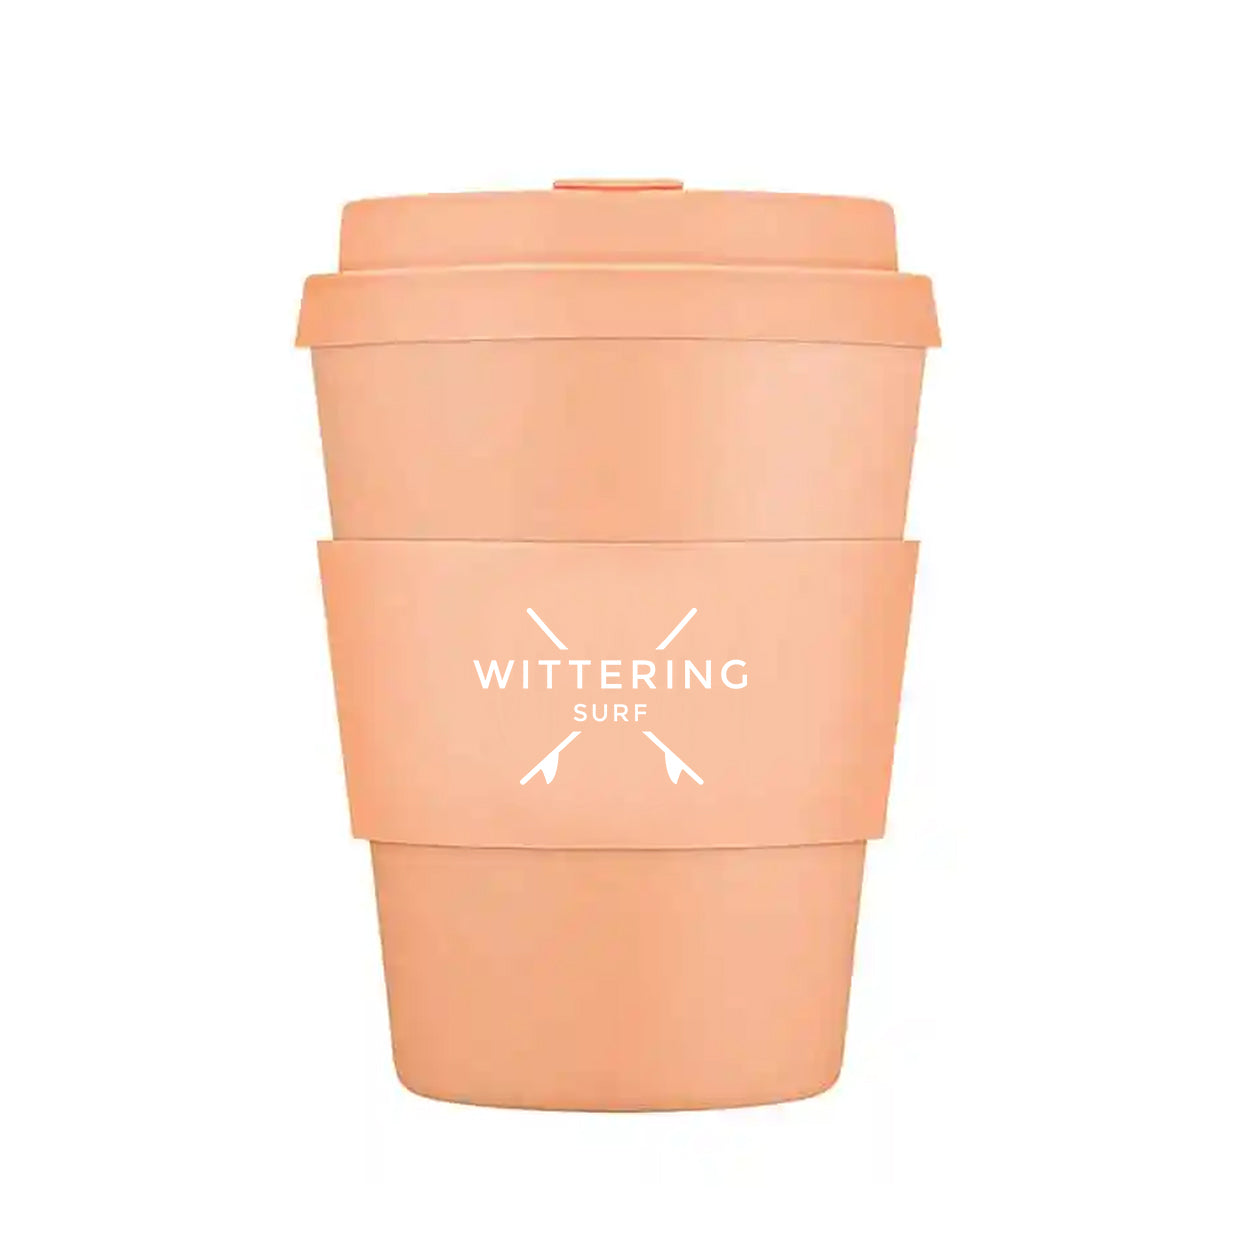 Wittering Surf Reusable Takeaway Cup - Peach - Wittering Surf Shop